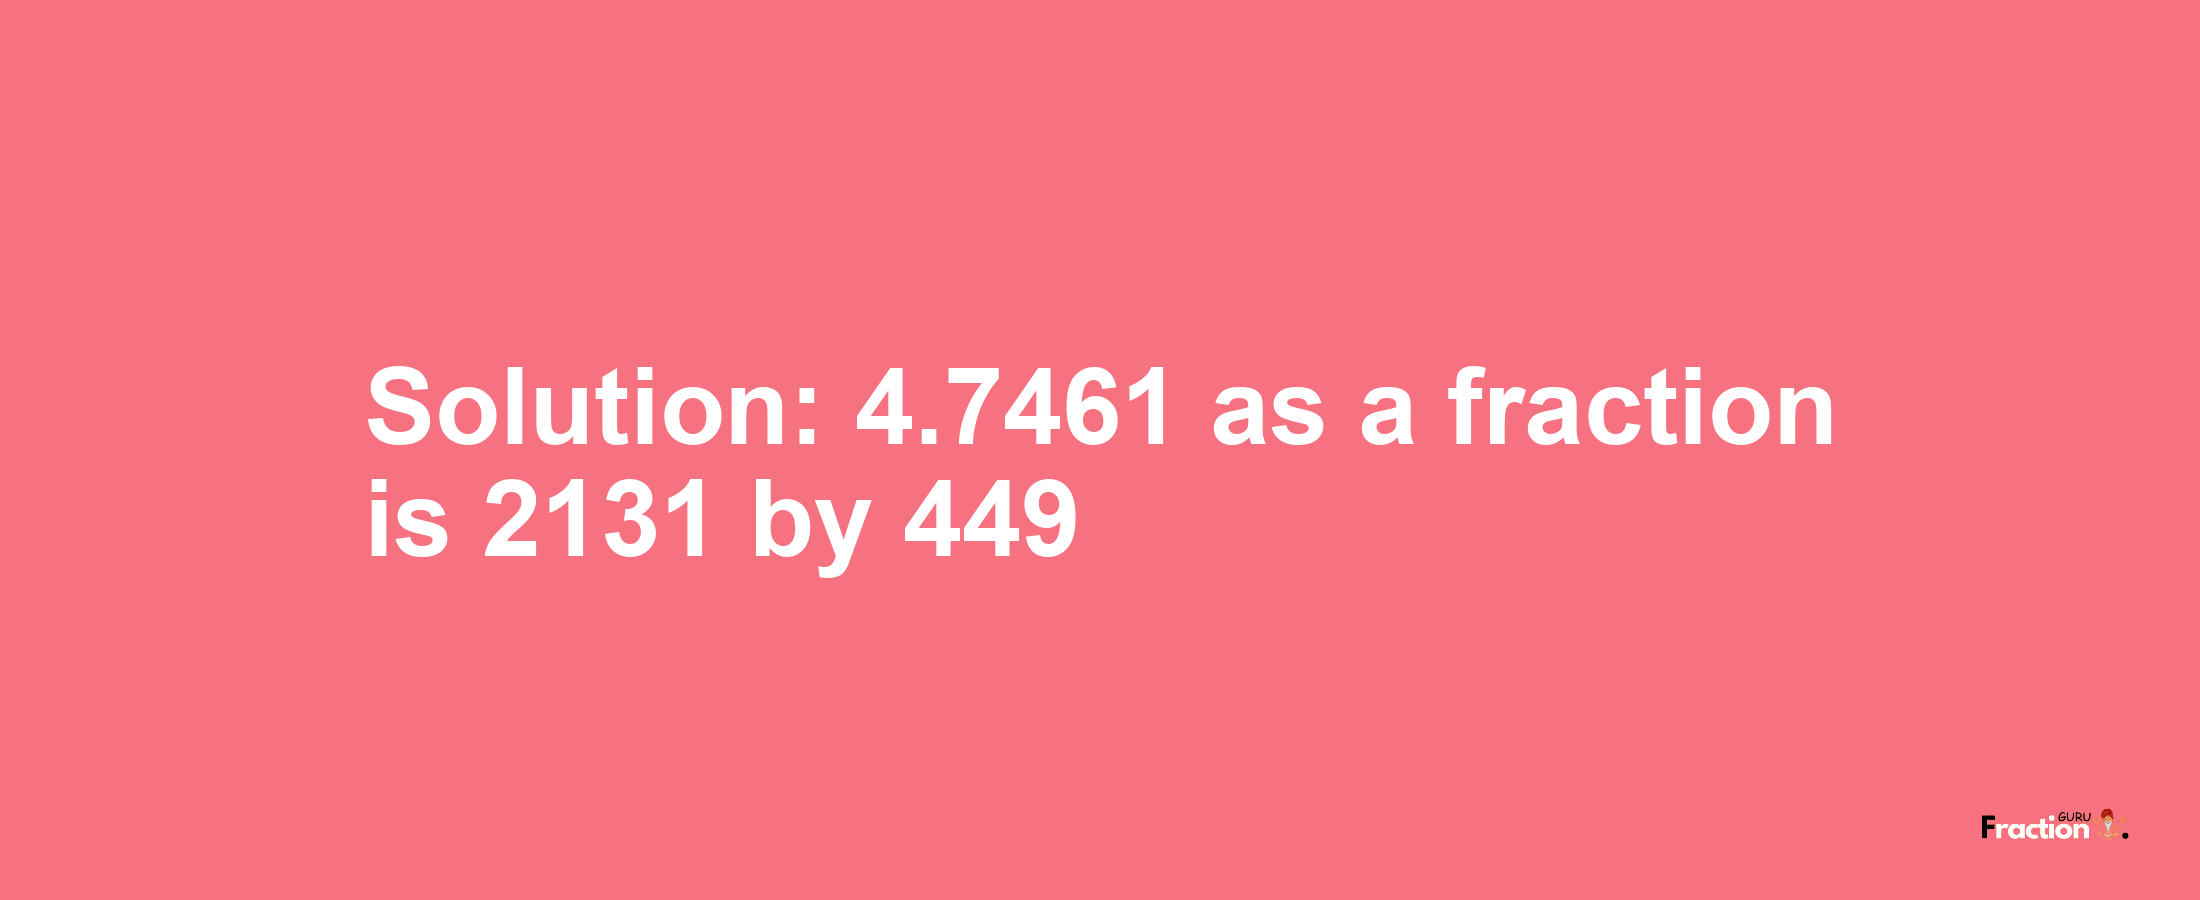 Solution:4.7461 as a fraction is 2131/449